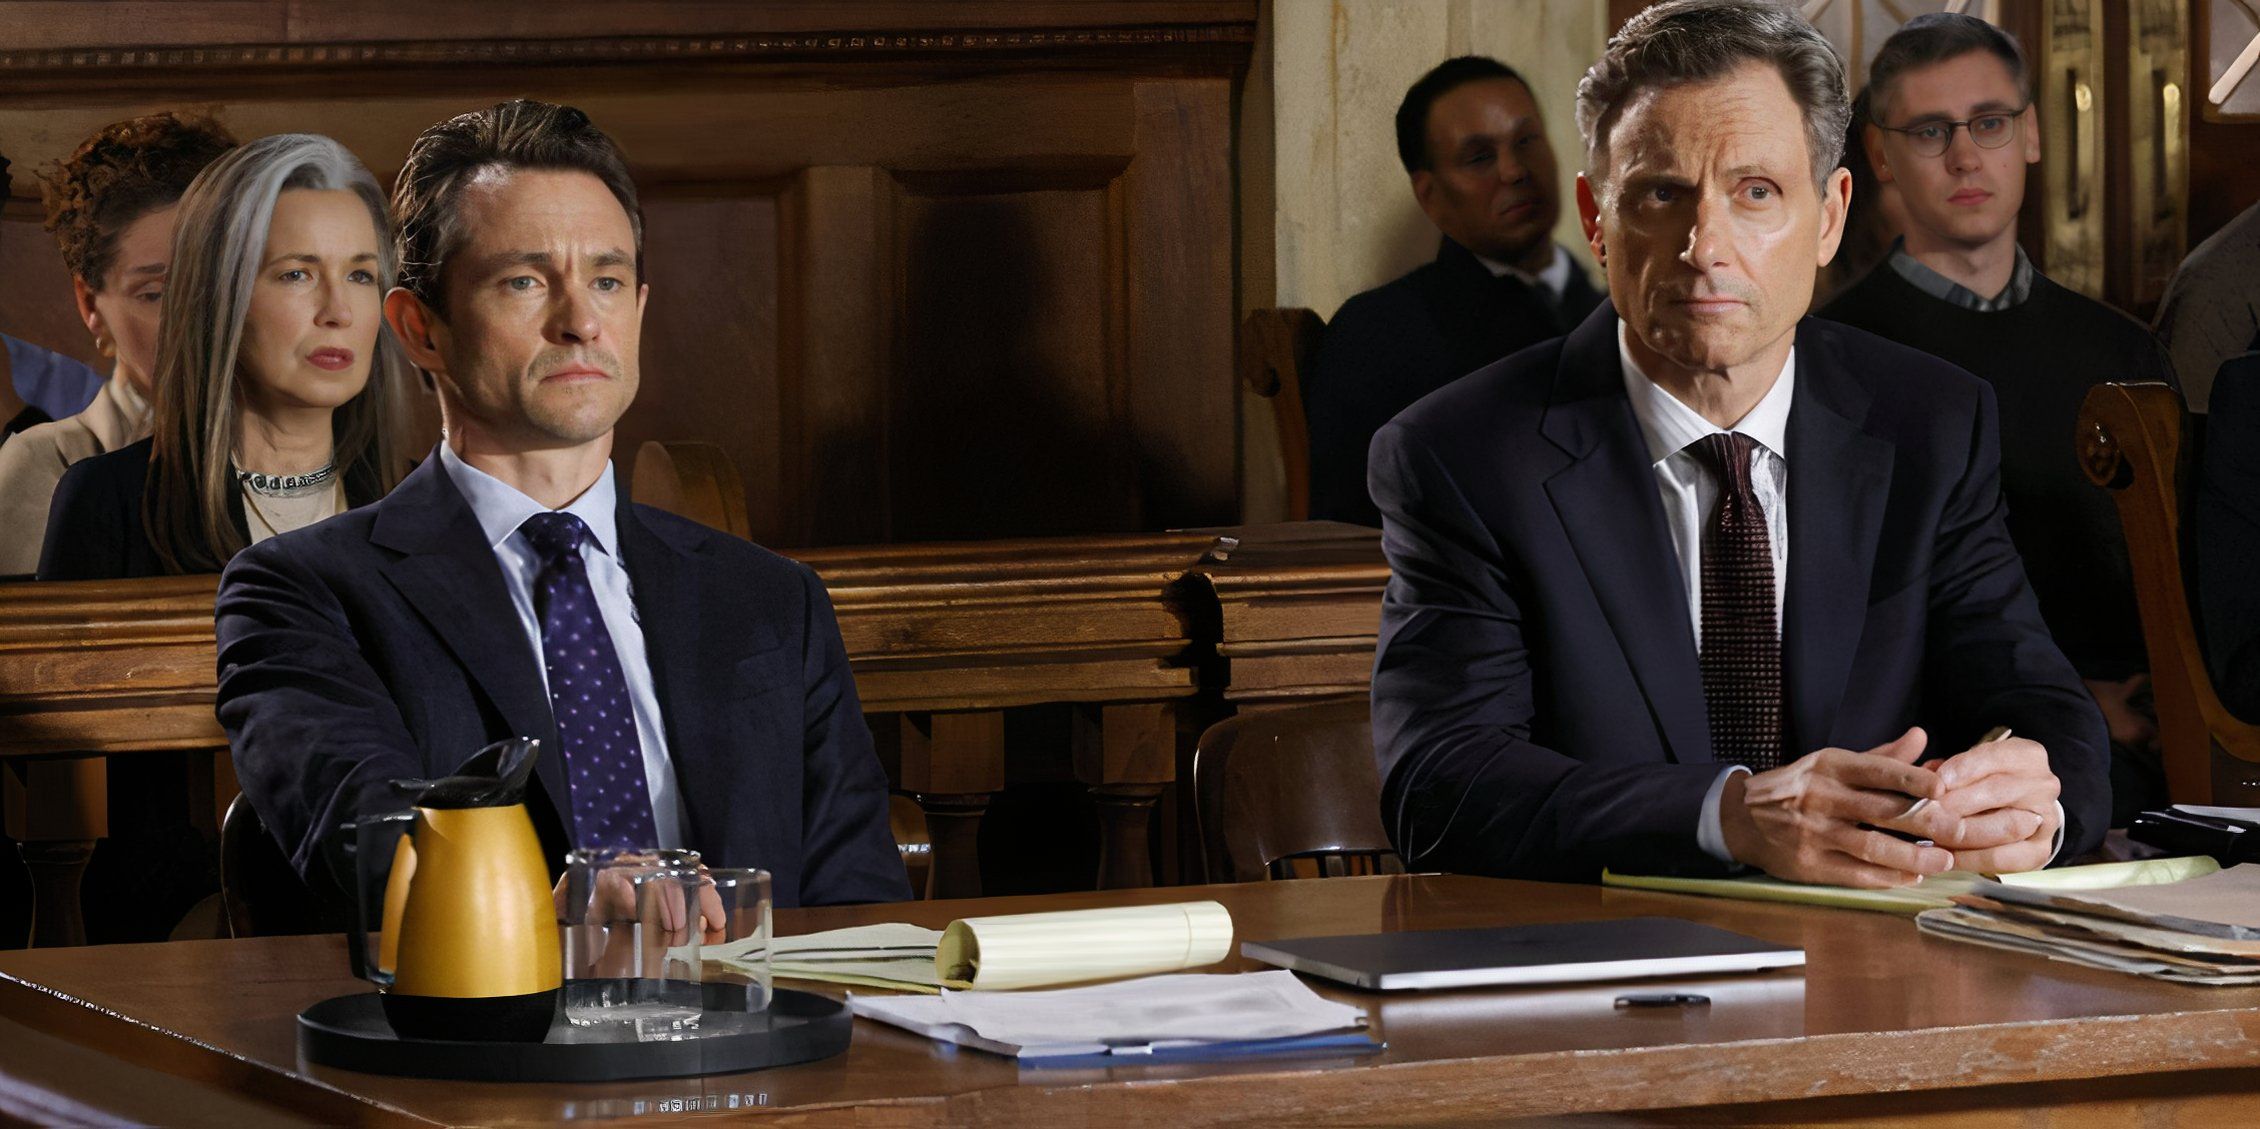 Law & Order Price and Baxter sit together at the defense table